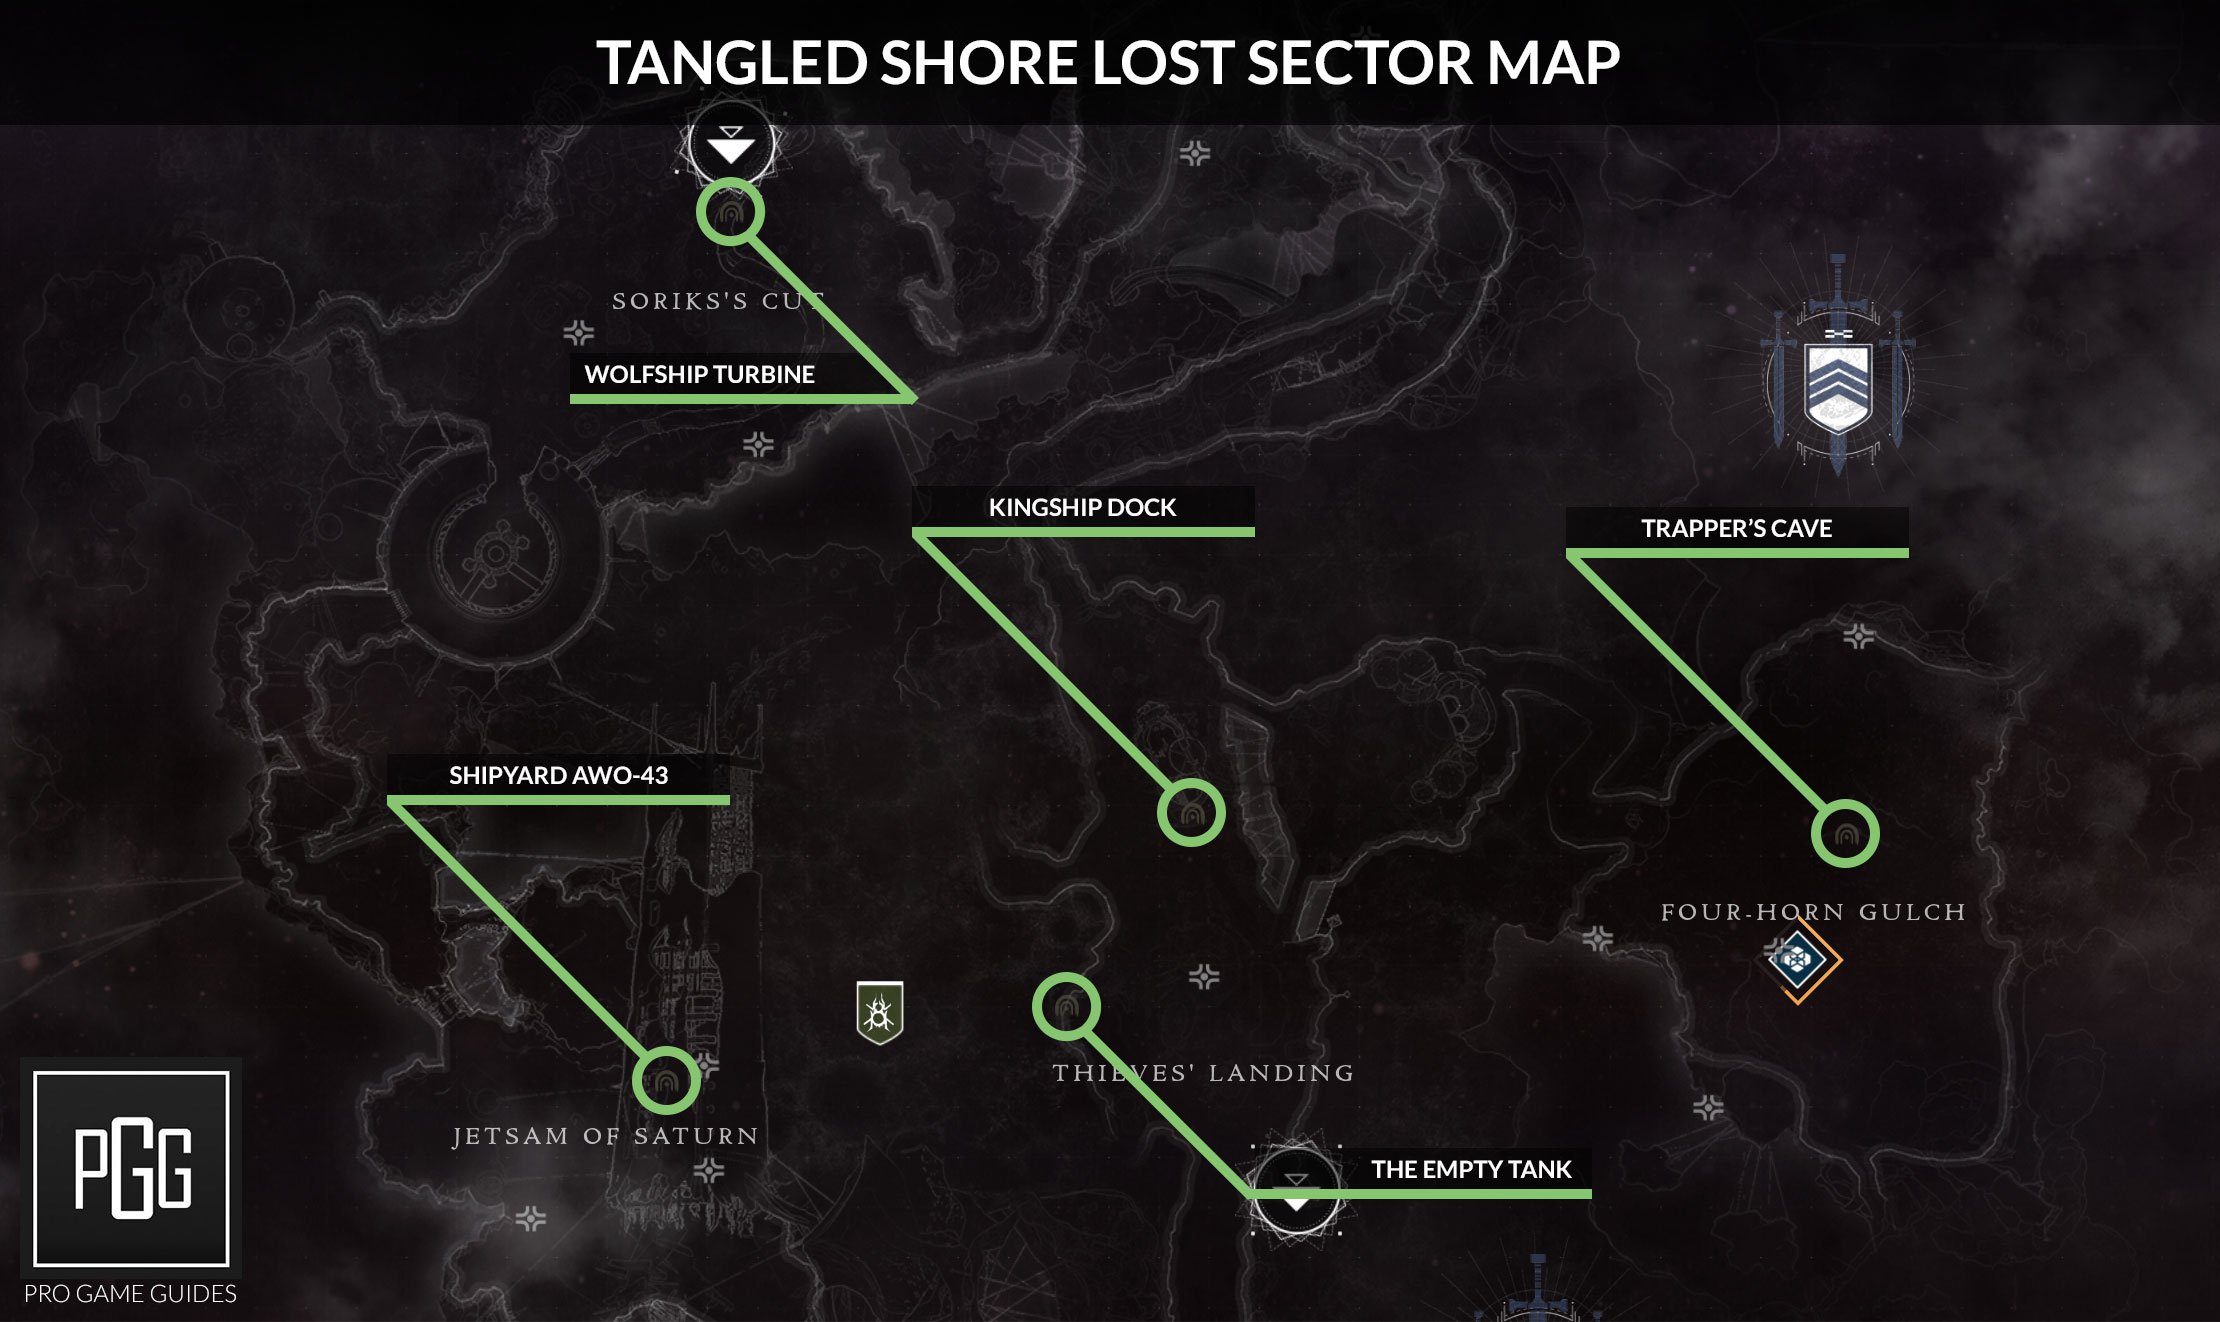 Destiny 2 Lost Sector Locations Maps All Lost Sectors In Destiny 2 Forsaken Pro Game Guides - roblox lost game map